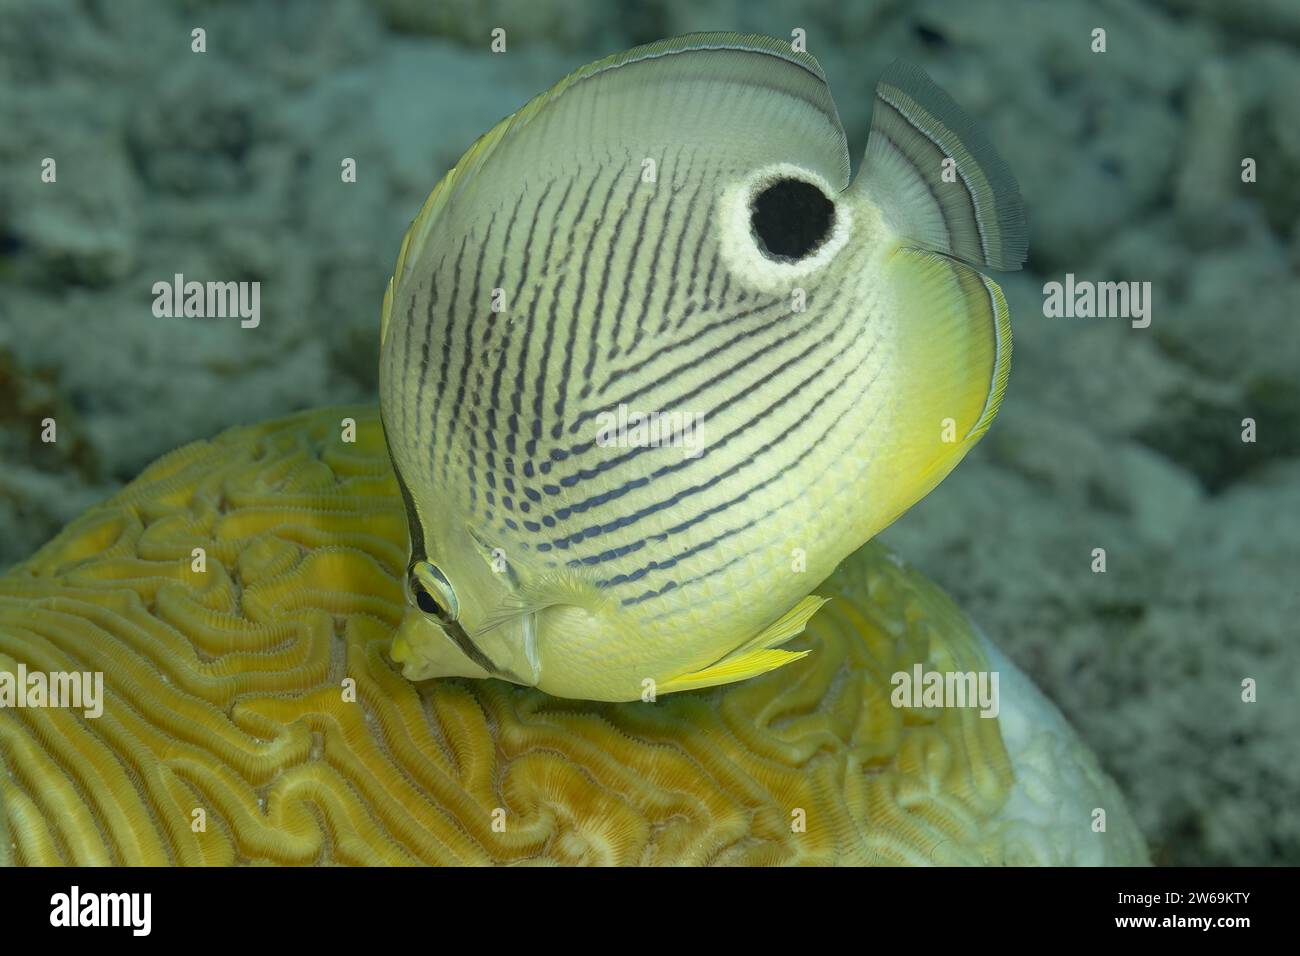 This image features a Foureye Butterflyfish, known scientifically as Chaetodon capistratus, perched above the brain coral Stock Photo